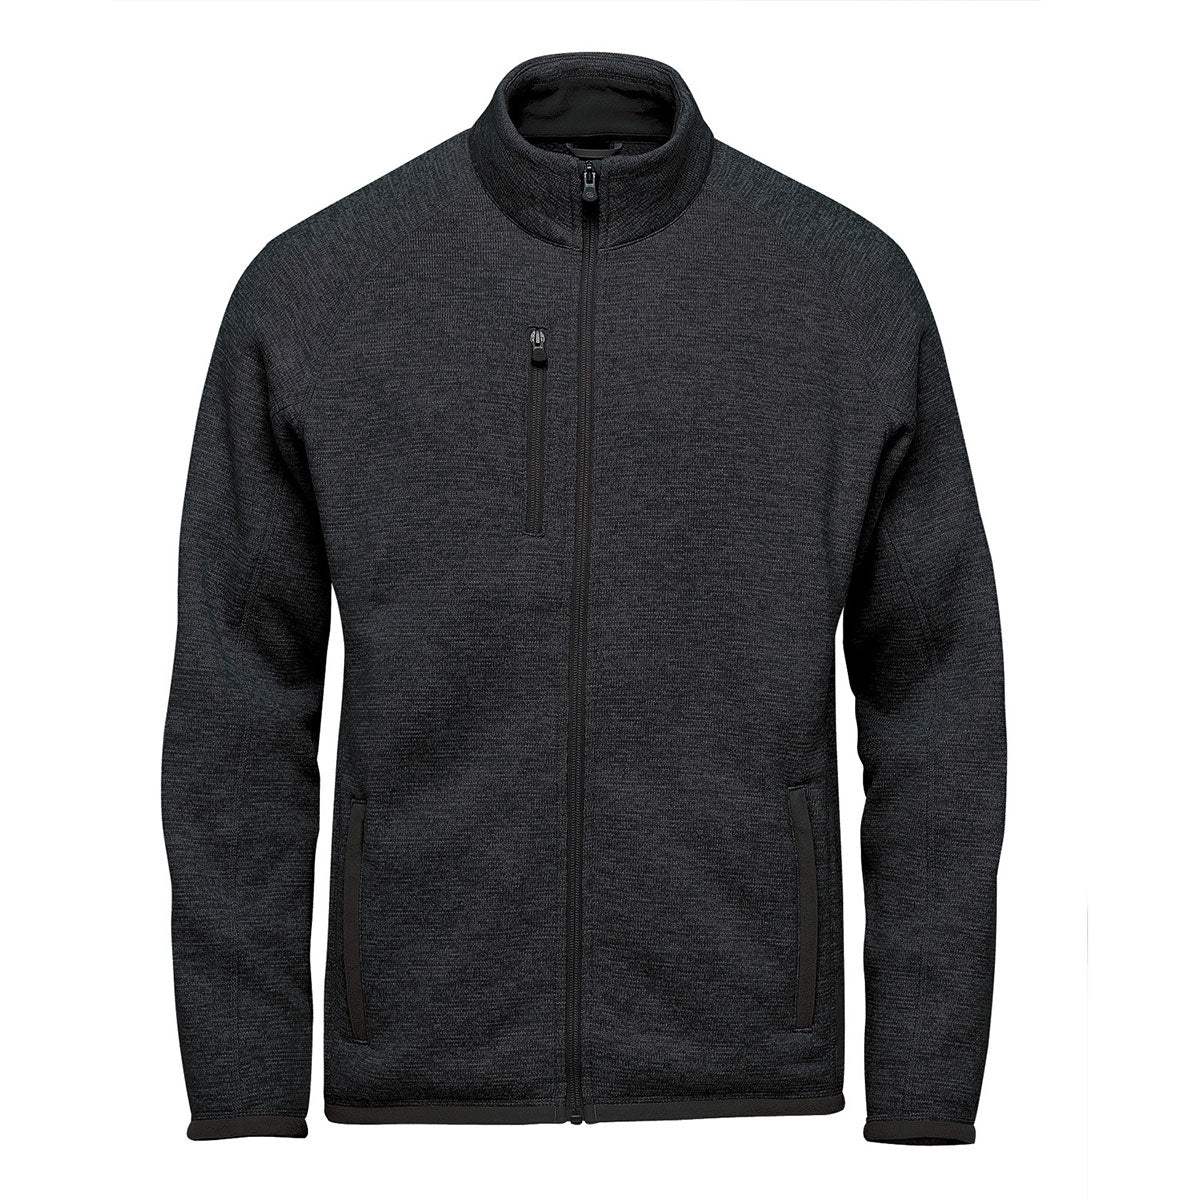 Men’s Avalante Full Zip Fleece Jacket by Stormtech - Promotions Only Group Limited